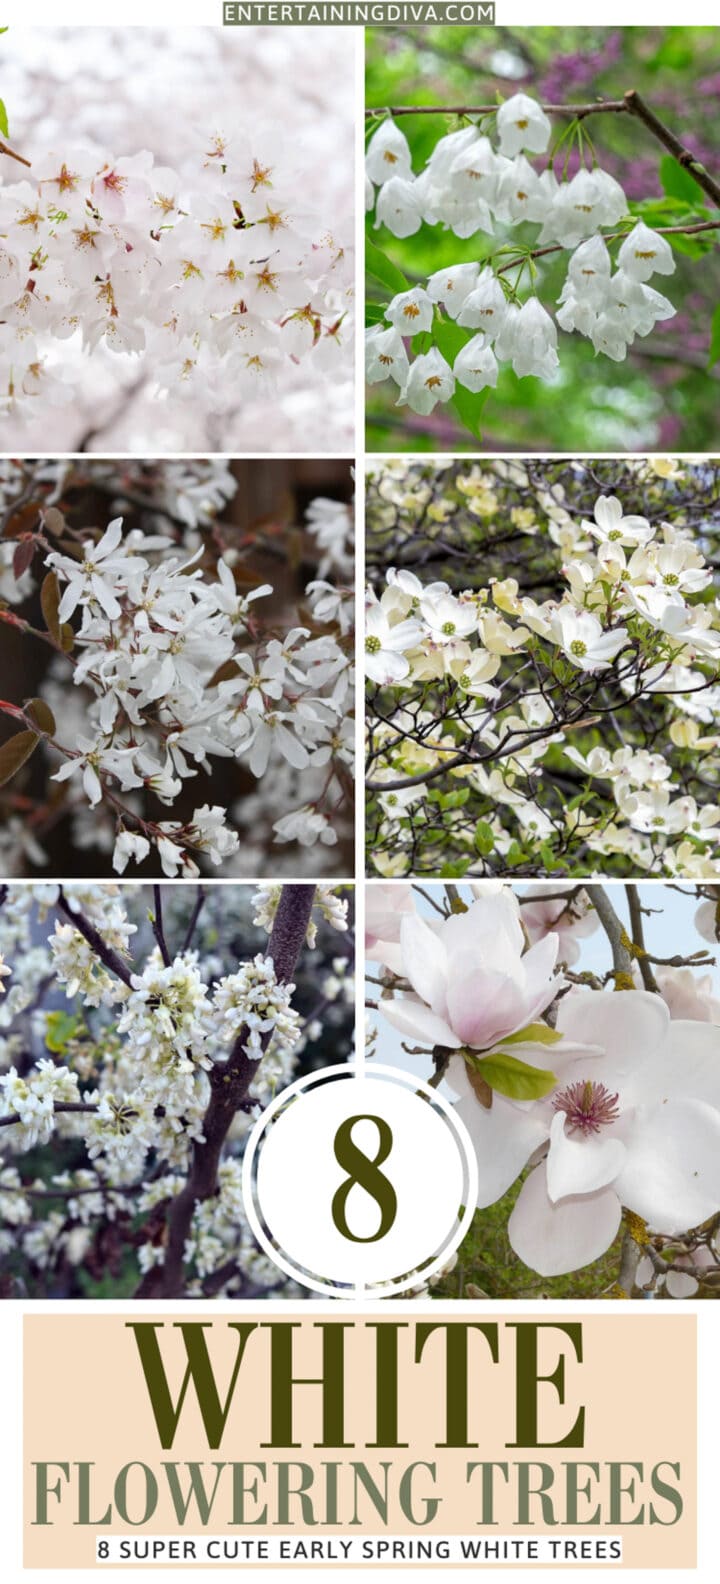 8 Early Spring White Flowering Trees (and one to avoid)